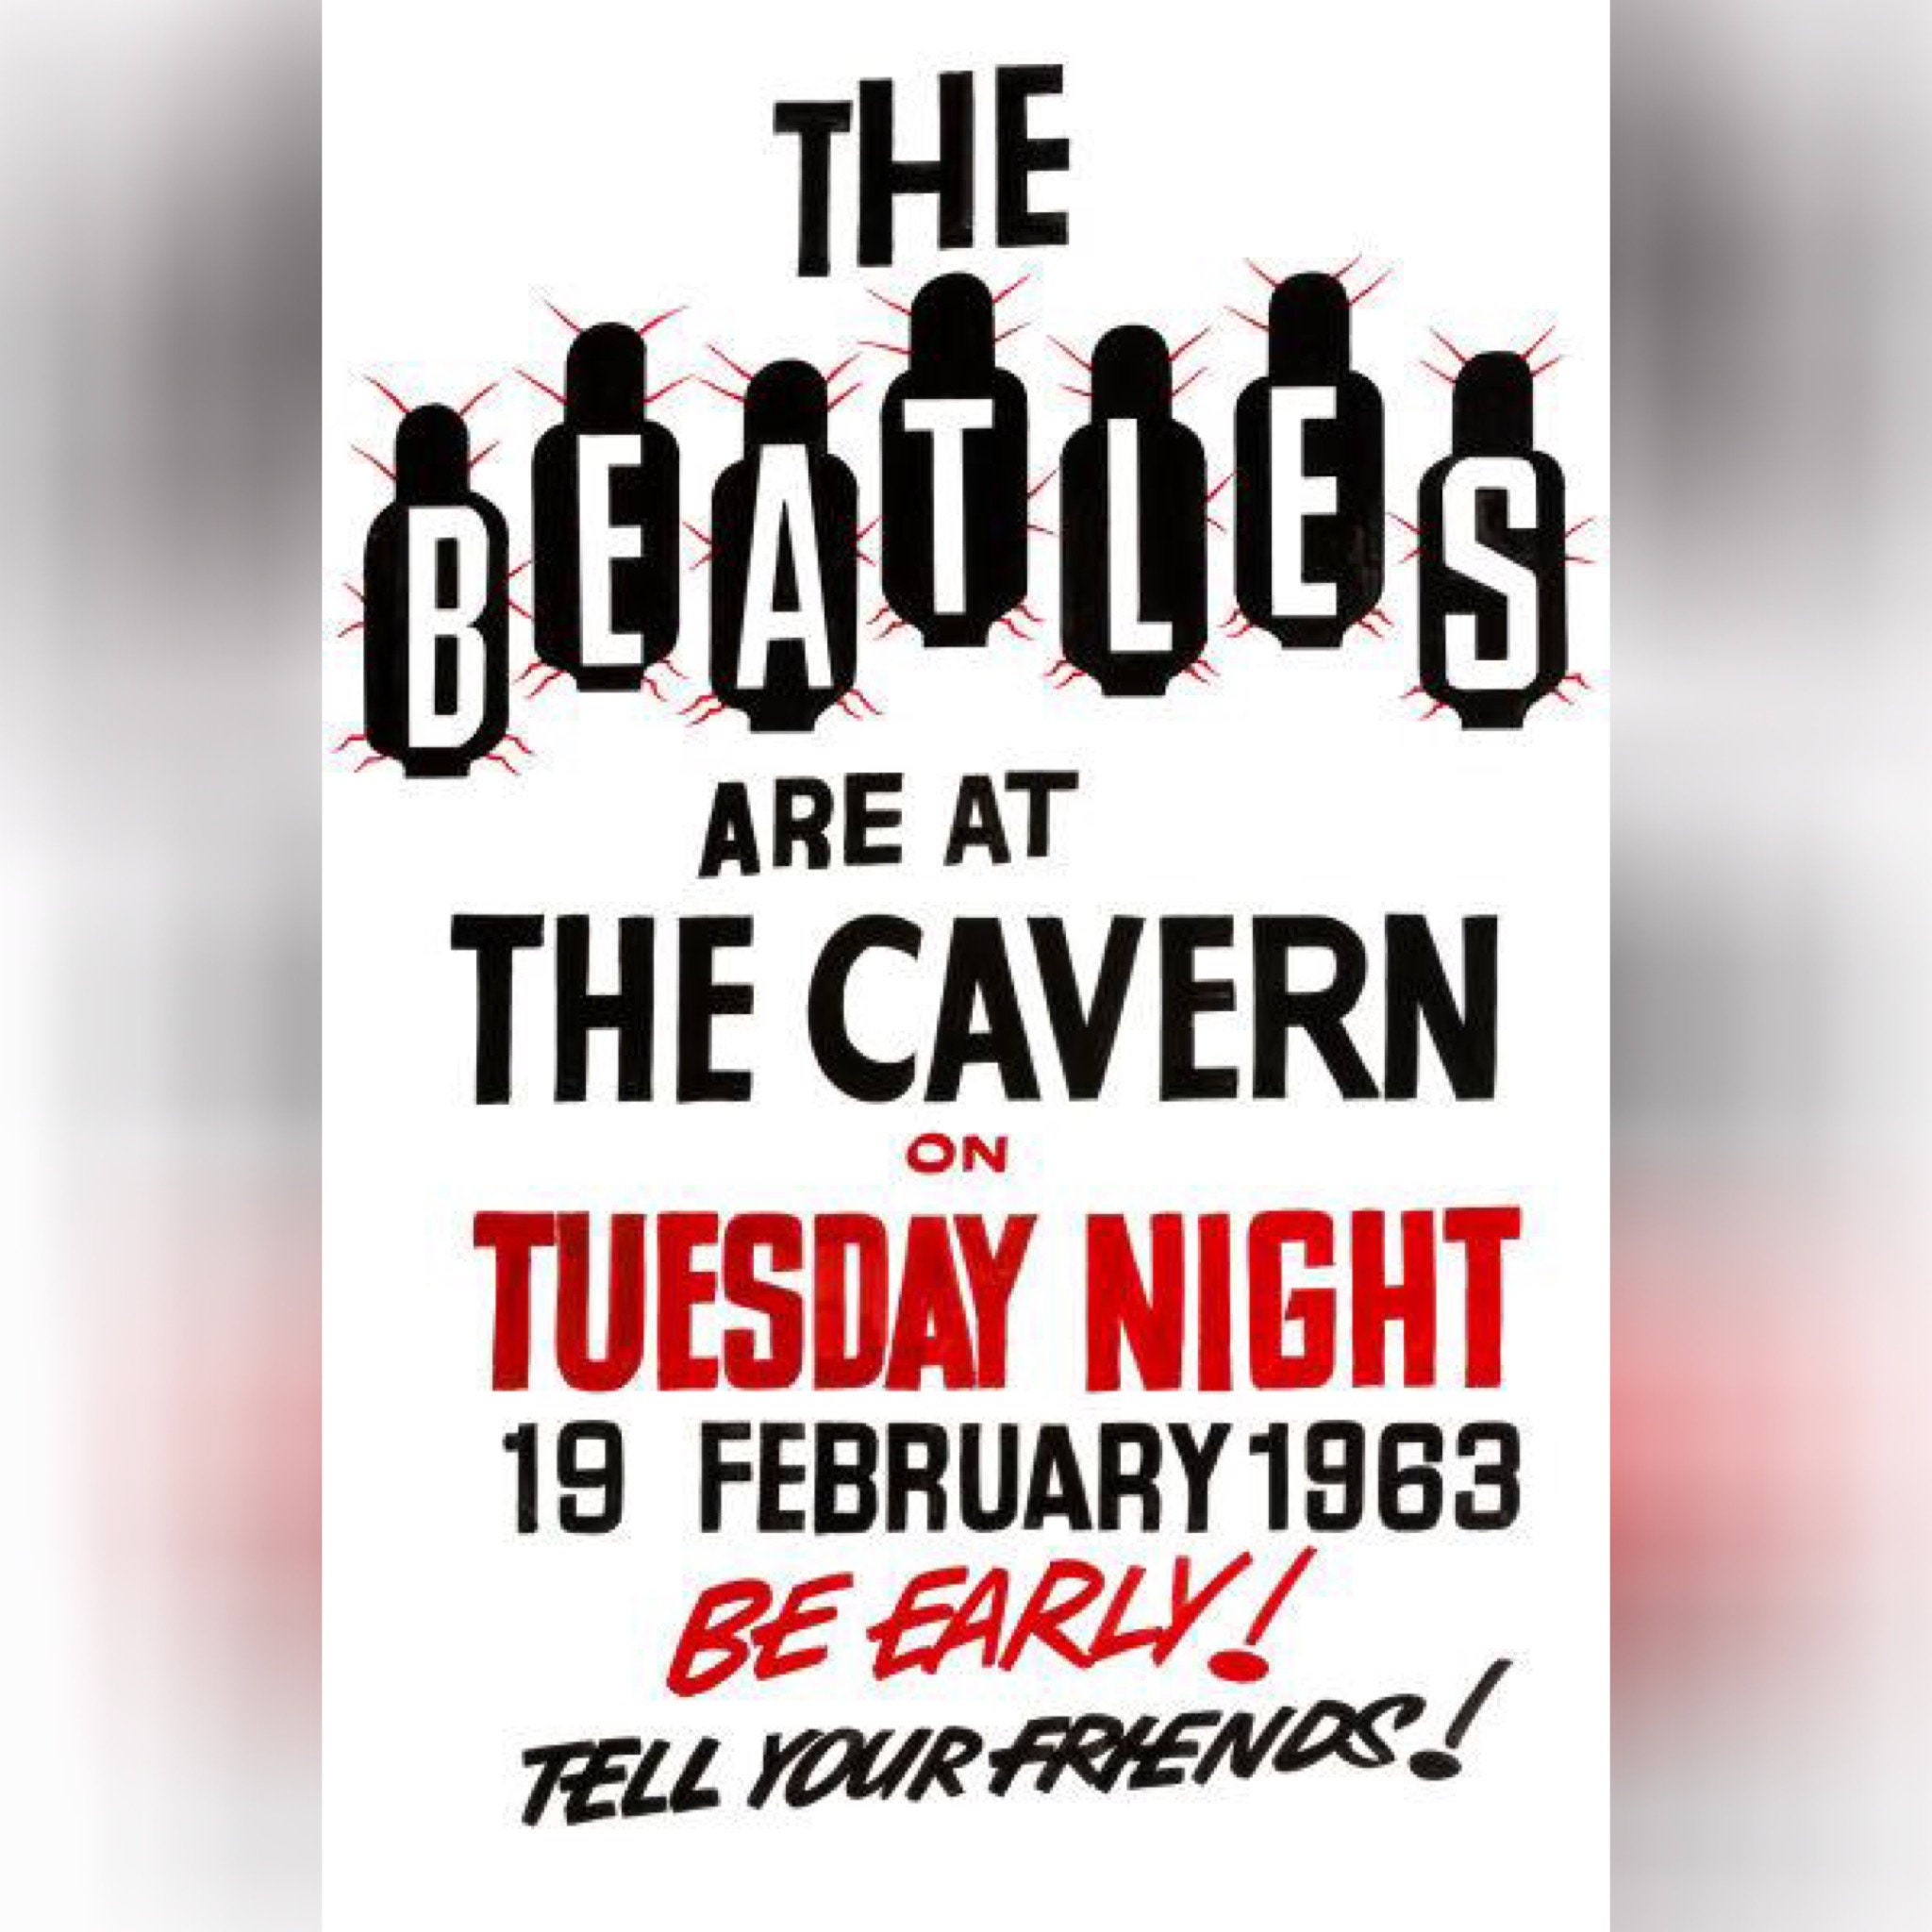 The Cavern Club Beatles Poster The Cavern Print Repro Beatles Poster 